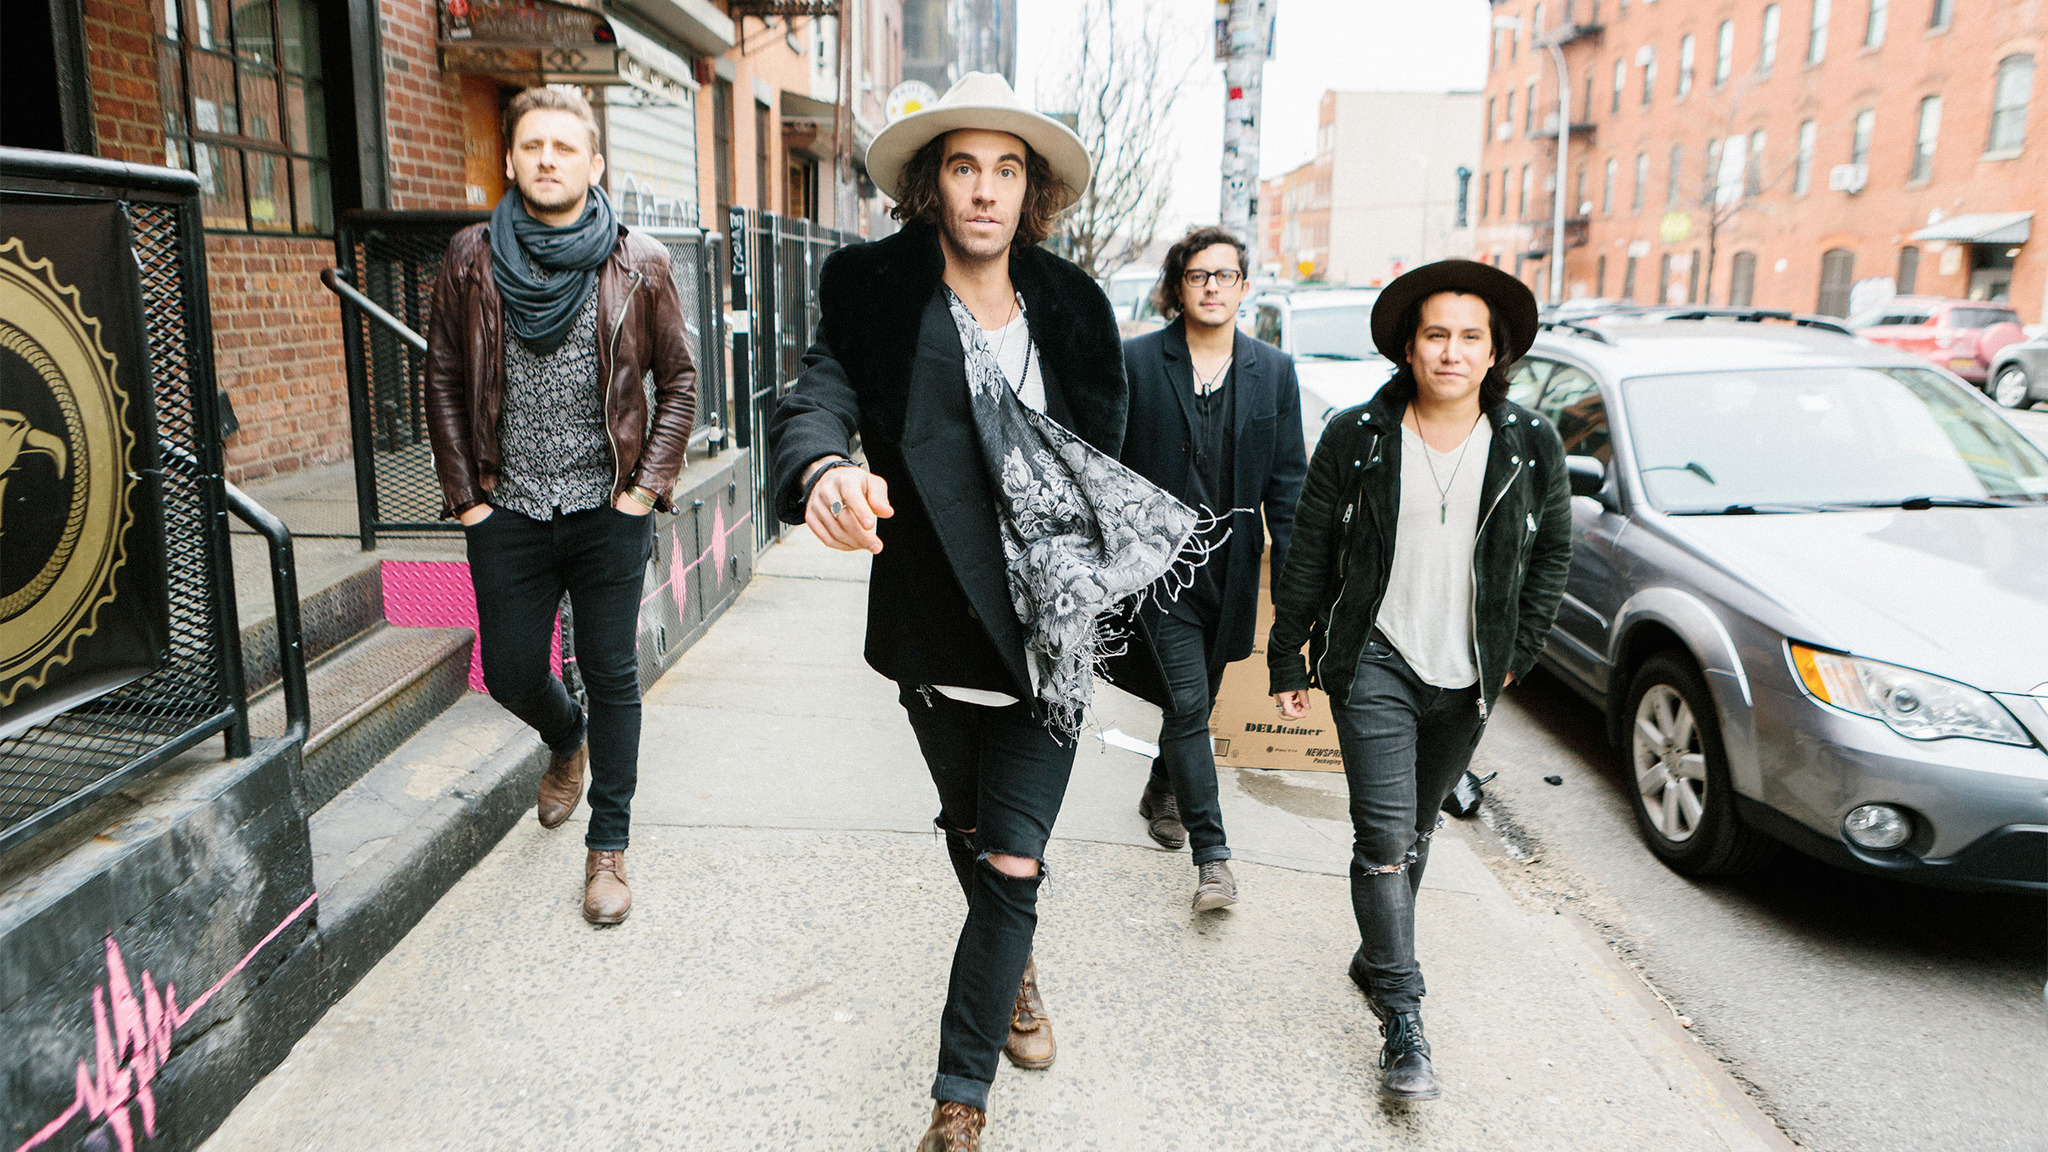 American Authors and Magic Giant - Band of Brothers Road Show with Spe